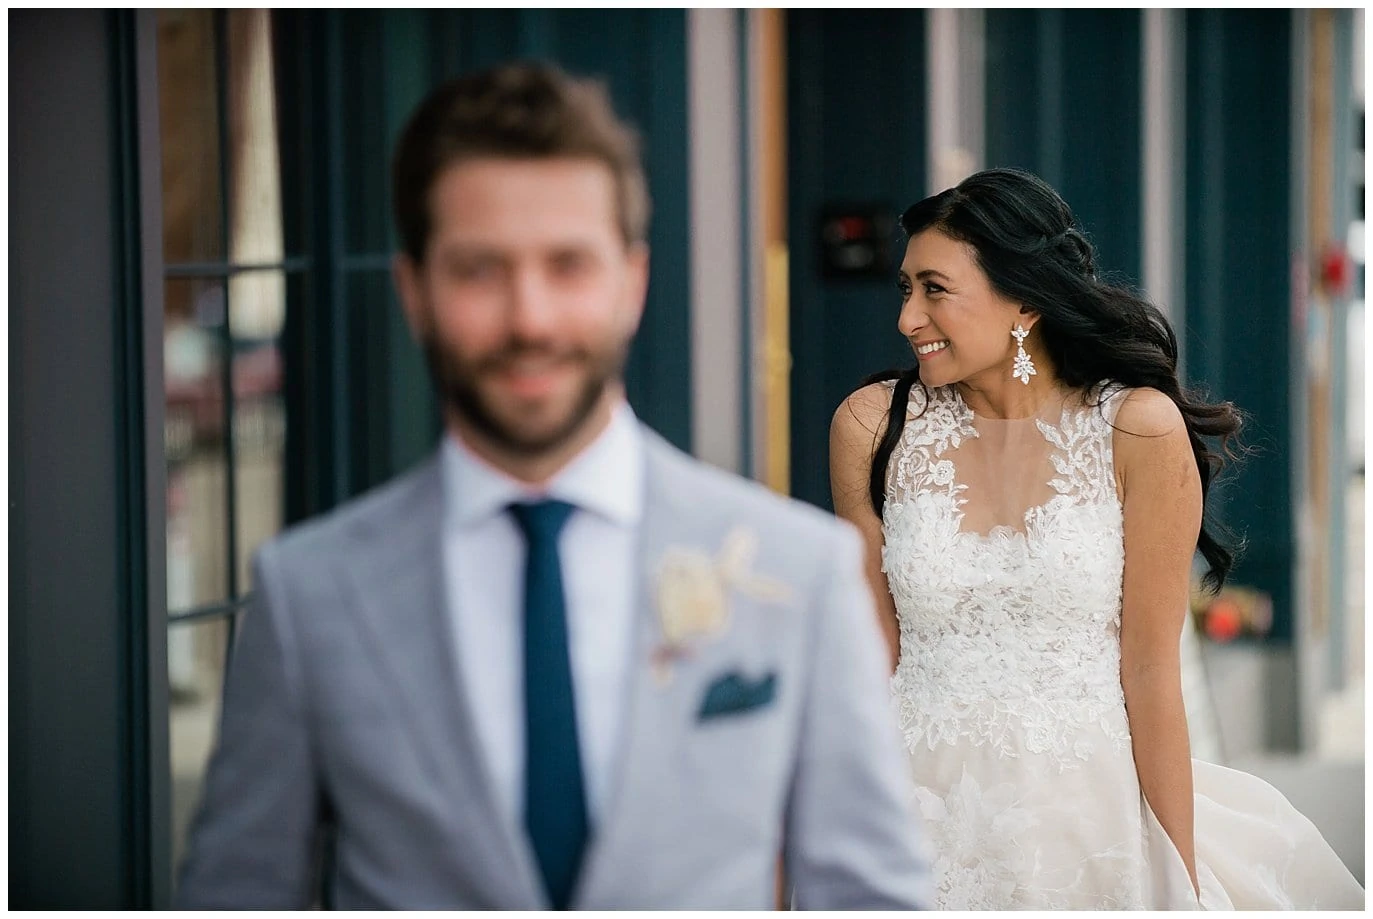 First look at the Ramble Hotel Denver by Blanc Wedding Photographer Jennie Crate